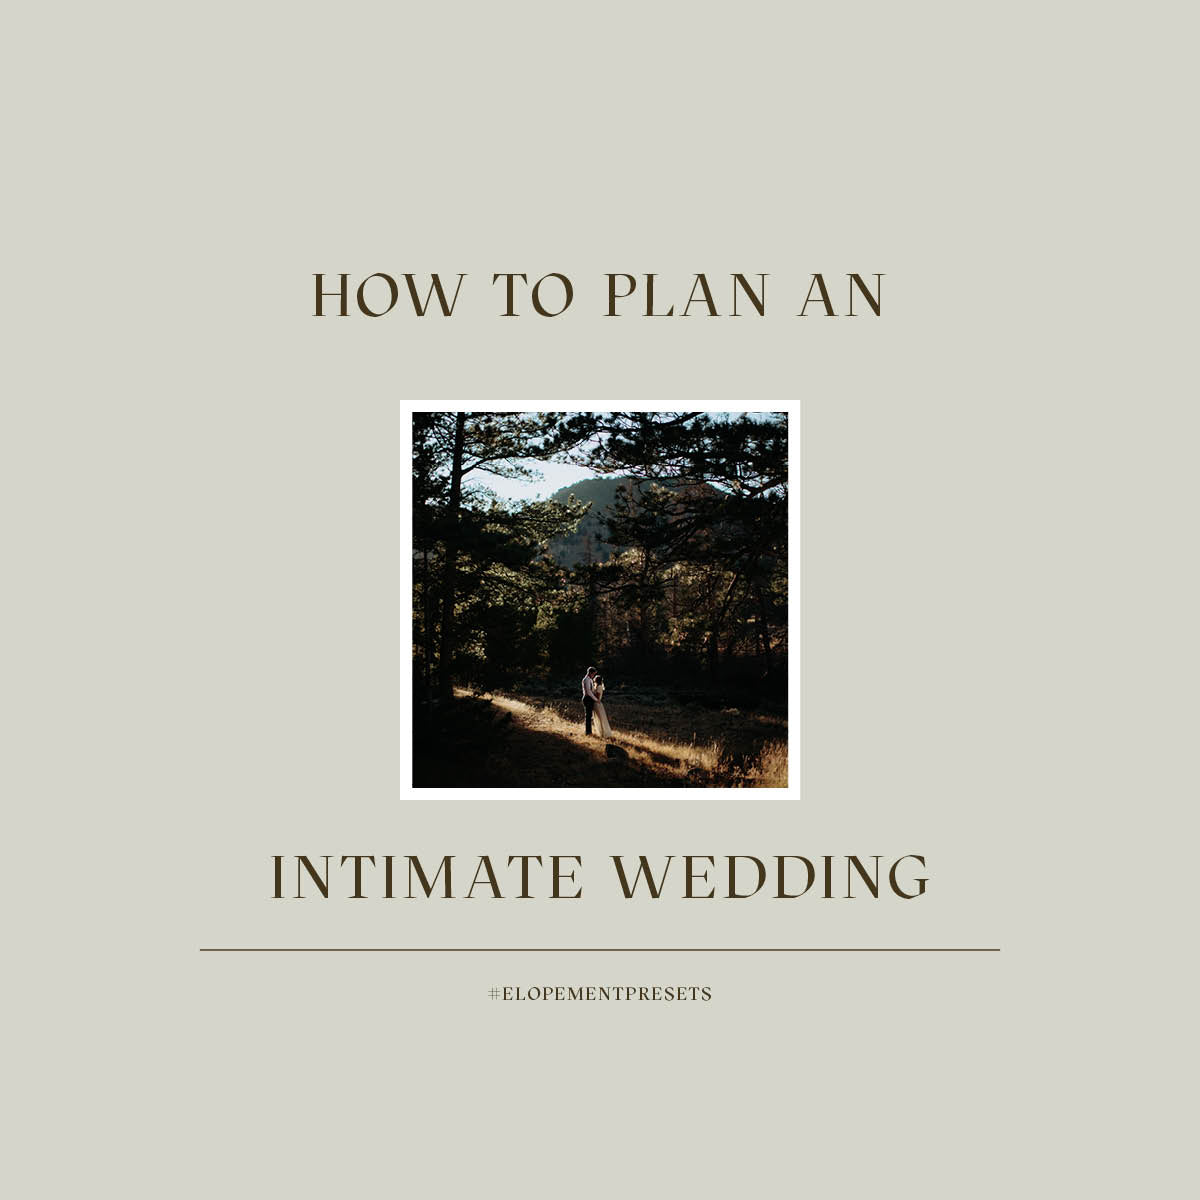 Helping Clients plan an Intimate Wedding